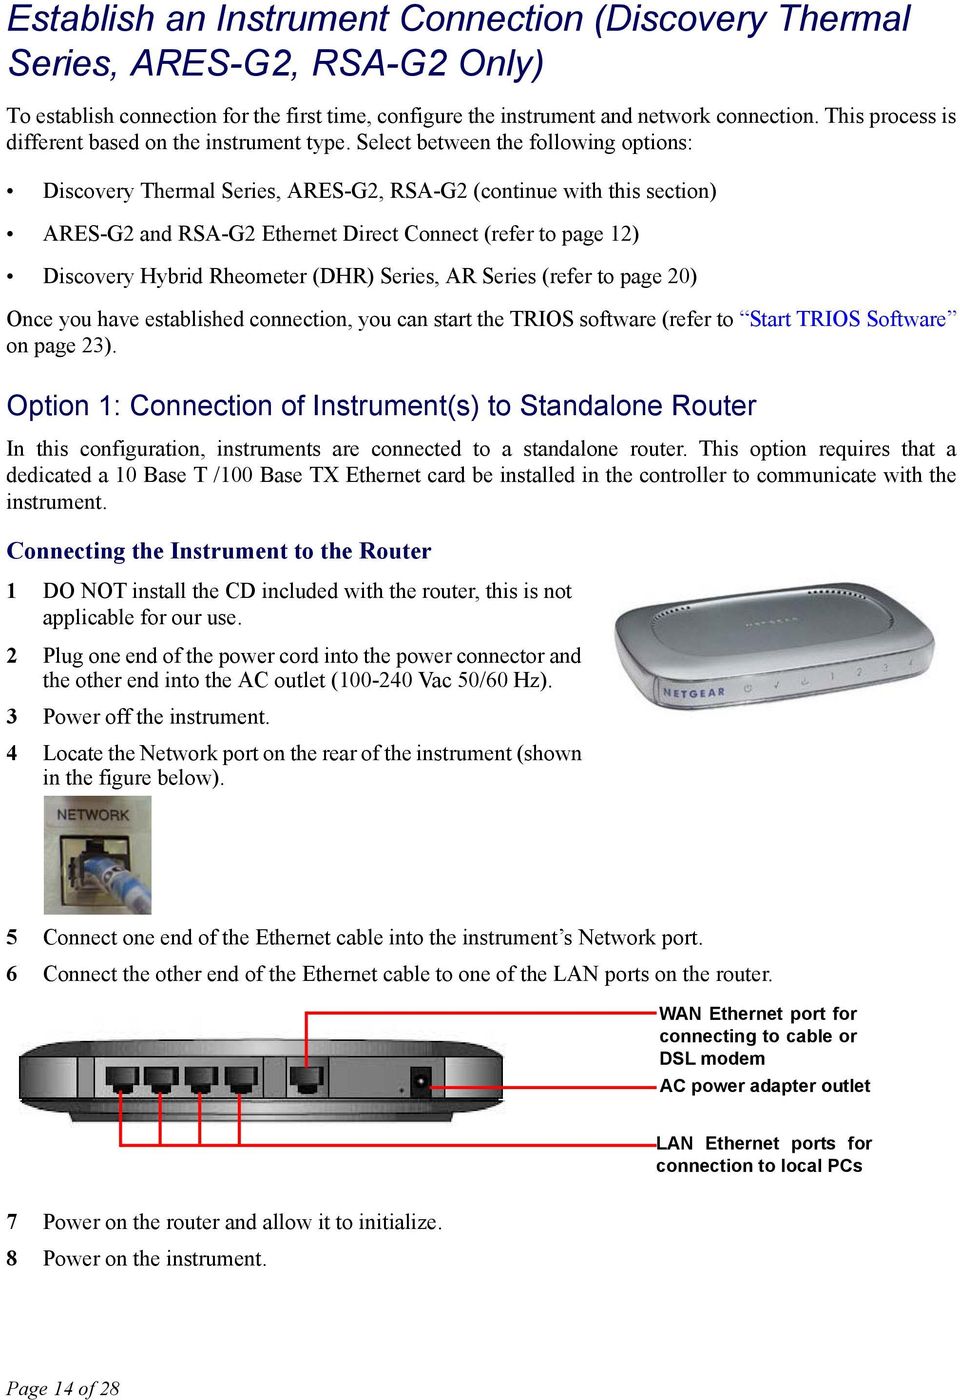 Select between the following options: Discovery Thermal Series, ARES-G2, RSA-G2 (continue with this section) ARES-G2 and RSA-G2 Ethernet Direct Connect (refer to page 12) Discovery Hybrid Rheometer